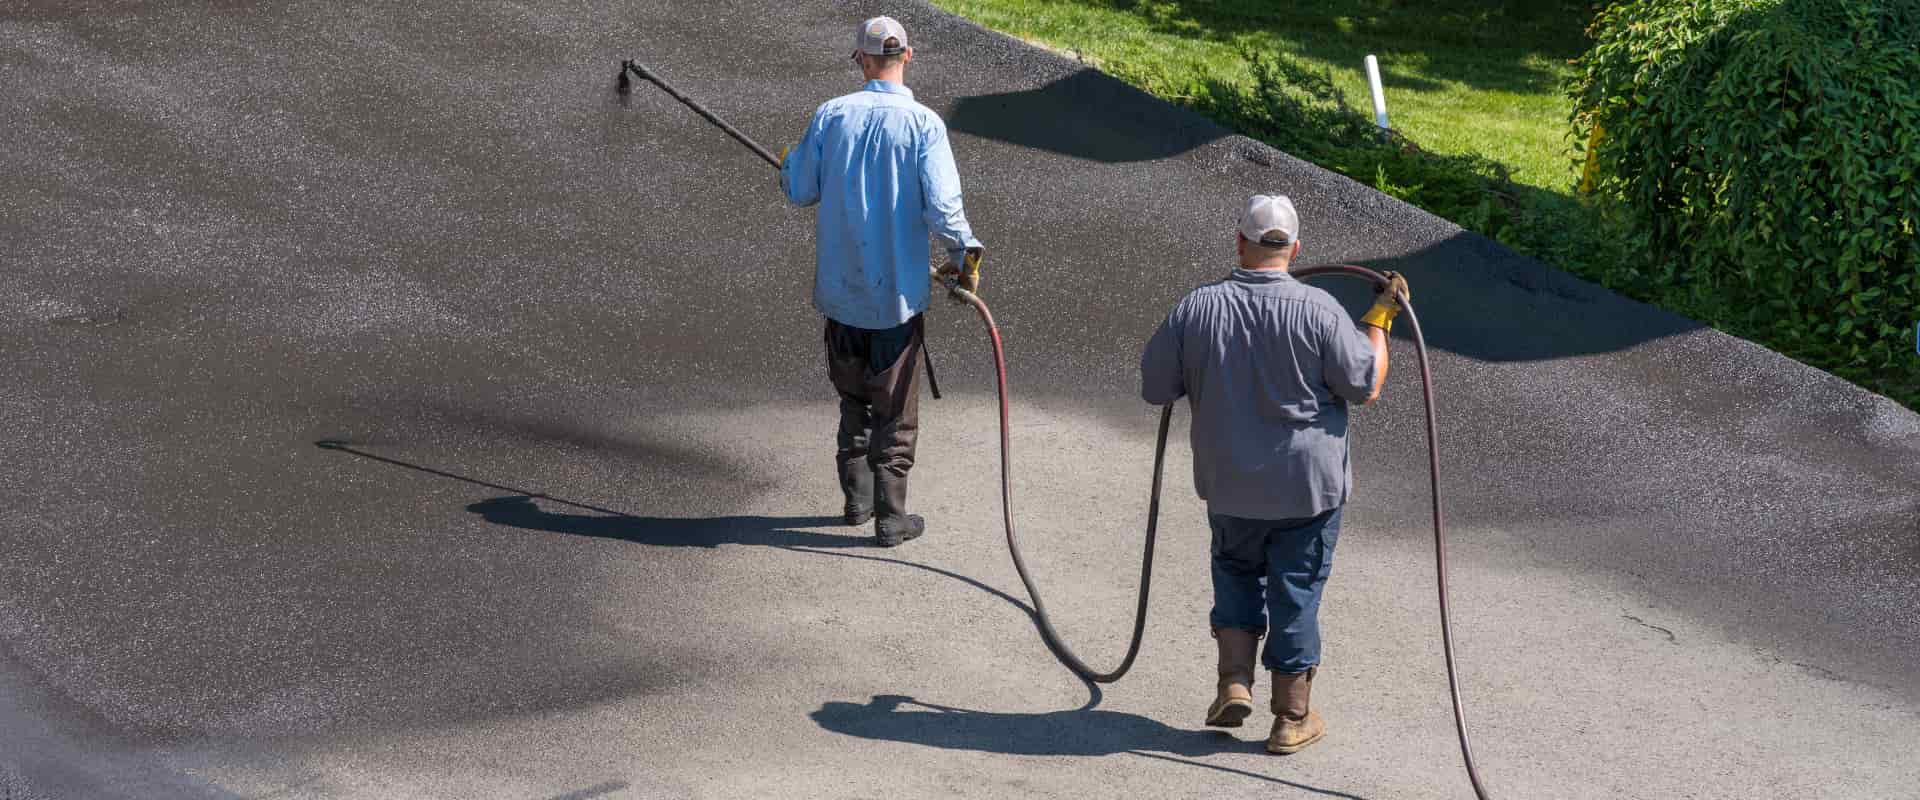 workers applying pavement coating